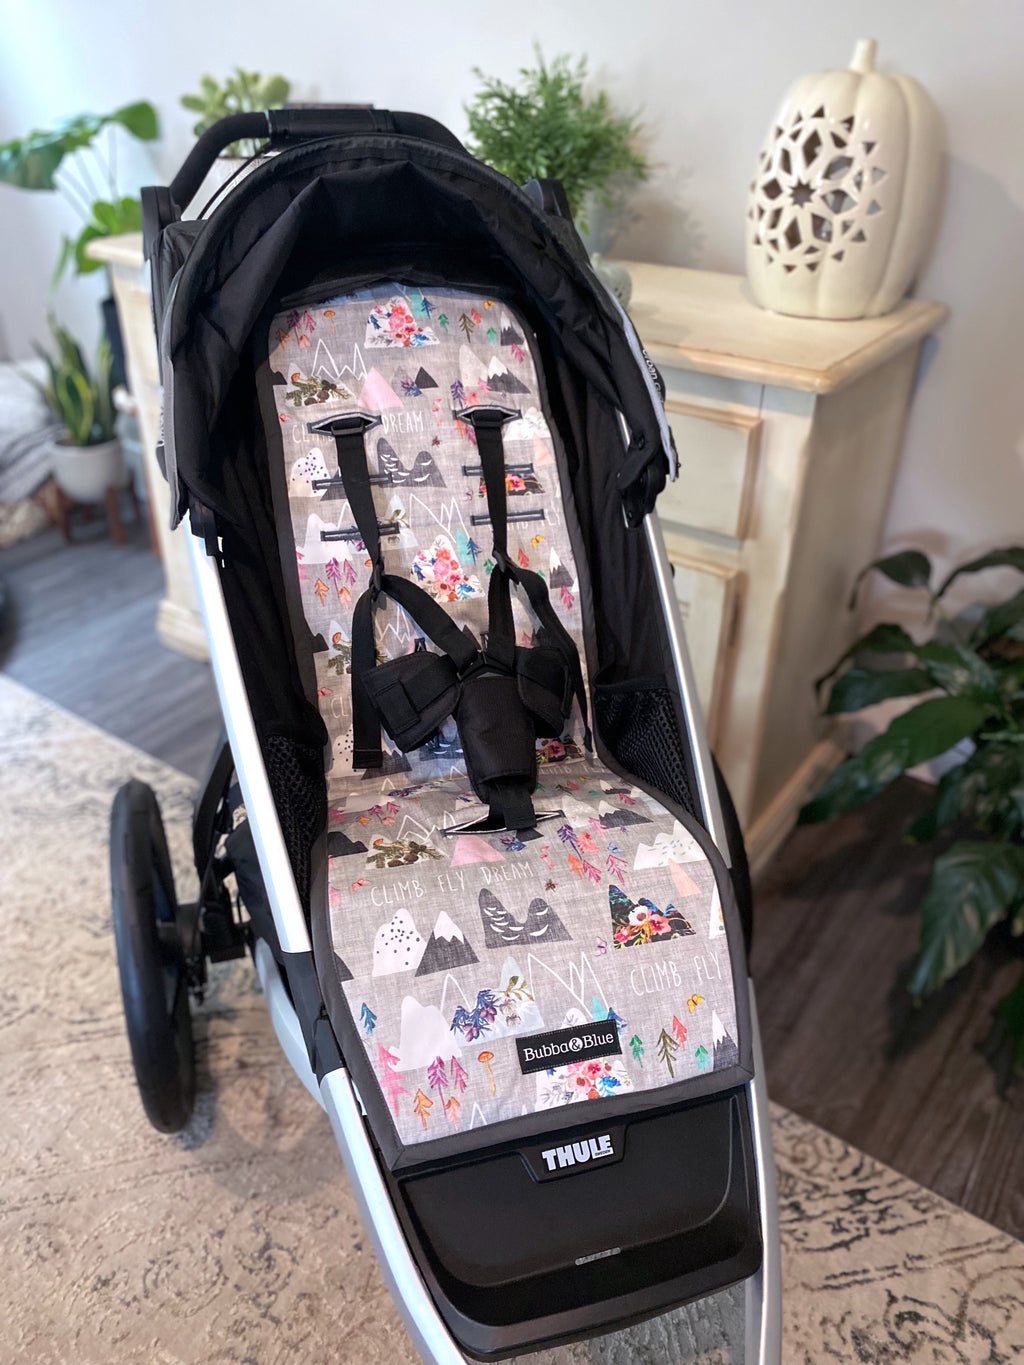 Stroller liner and foormuff set made to fit most strollers. Get a custom fit for a wide variety of strollers. These save your seat from wear and tear. This one is featured in the pint mountain print.